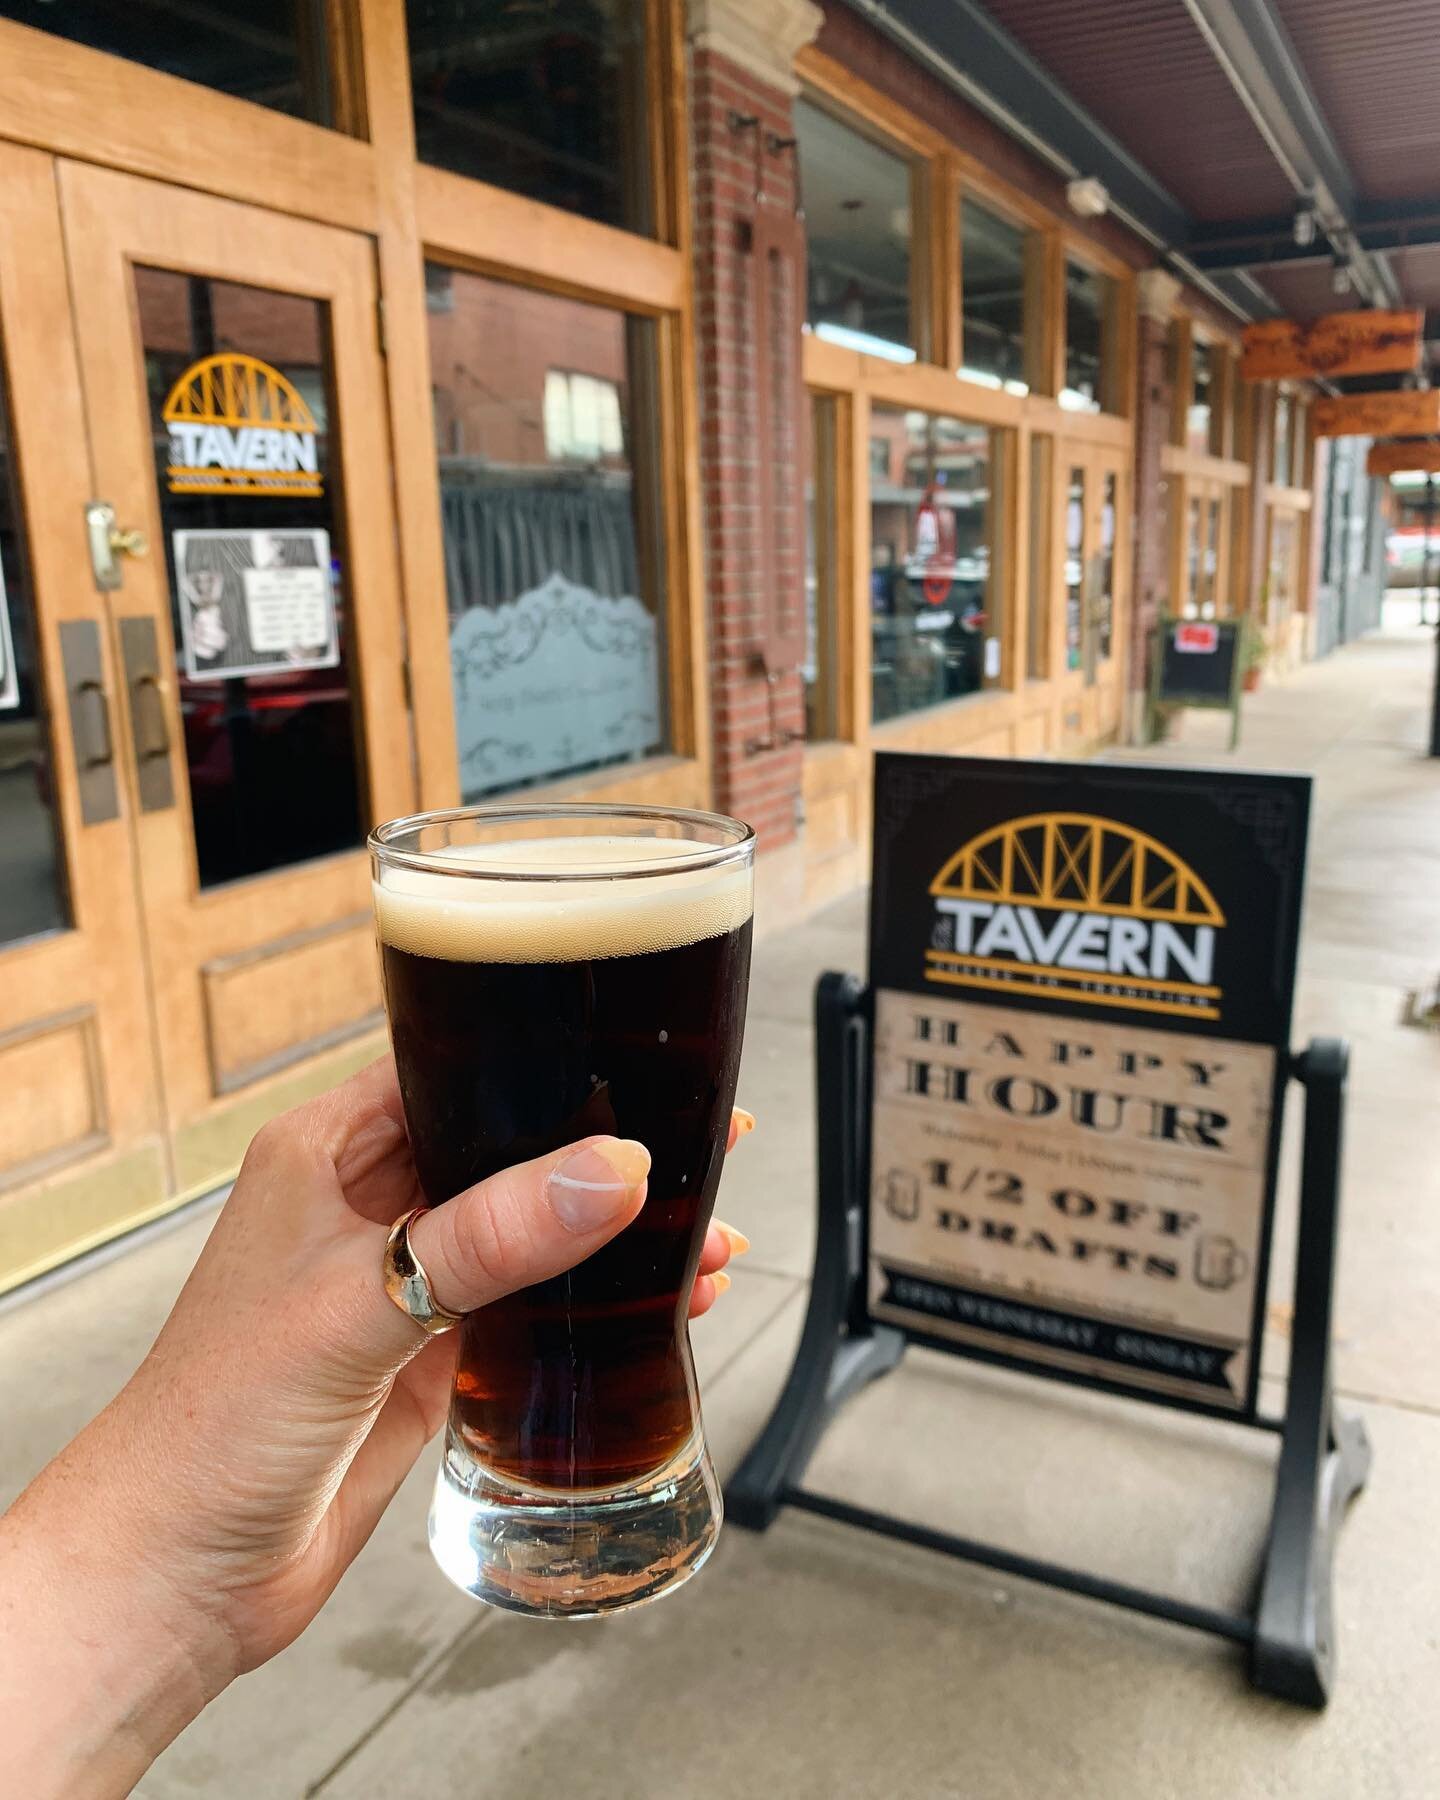 ℍ𝕒𝕡𝕡𝕪 ℍ𝕠𝕦𝕣 🍻 5-7pm today!! Enjoy 1/2 off all DRAFTS! We currently offer @platformbeerco Midnight Martin, @spoetzl_brewery Shiner Candied Pecan Porter, @northcountrybrewing This Is My Spot Ya Jagoff, and 9 other awesome taps! 

Join us to kick